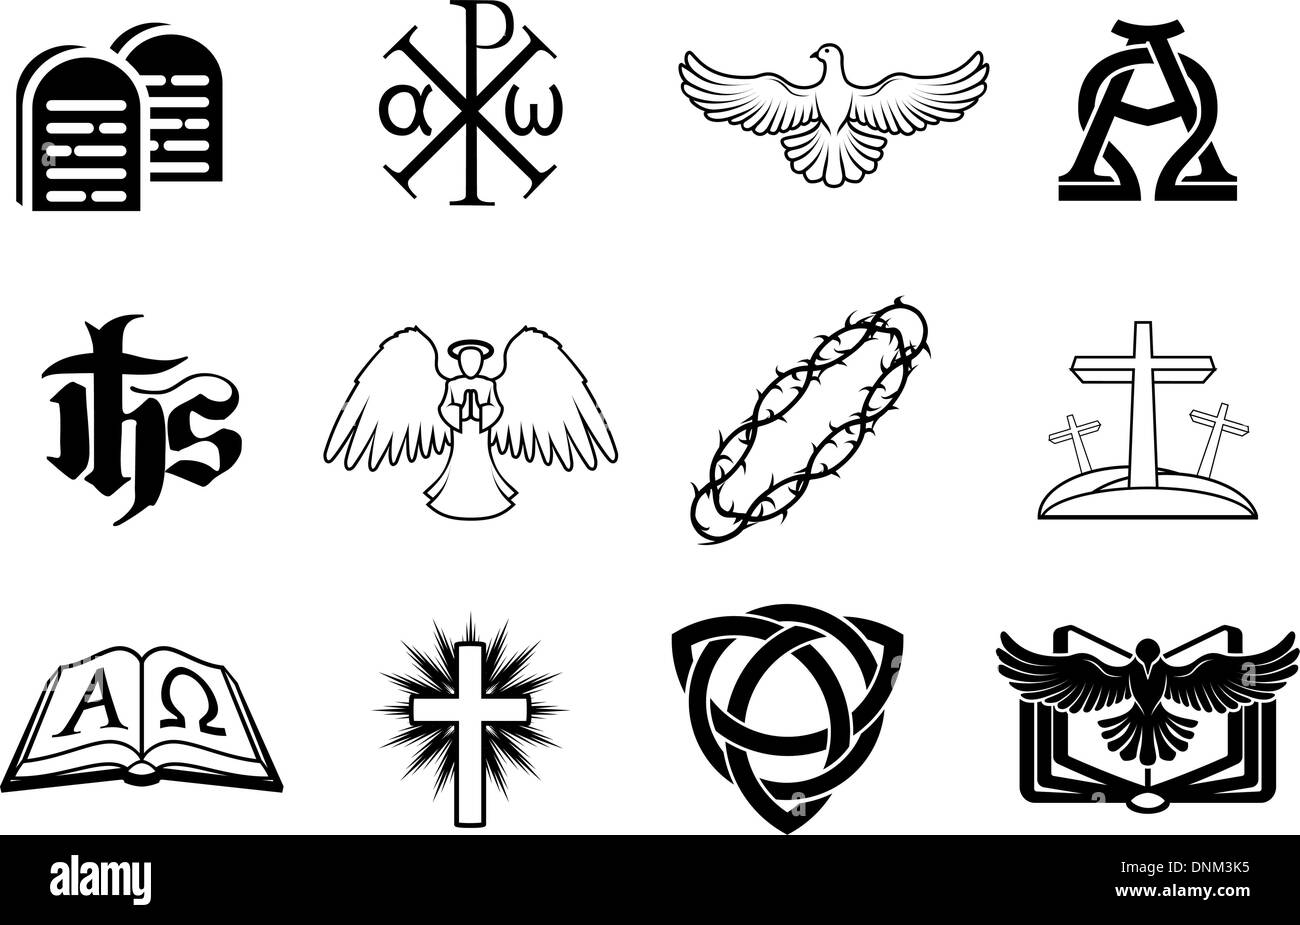 A set of Christian icons including angel, dove, alpha omega, Chi Ro and many more Stock Vector